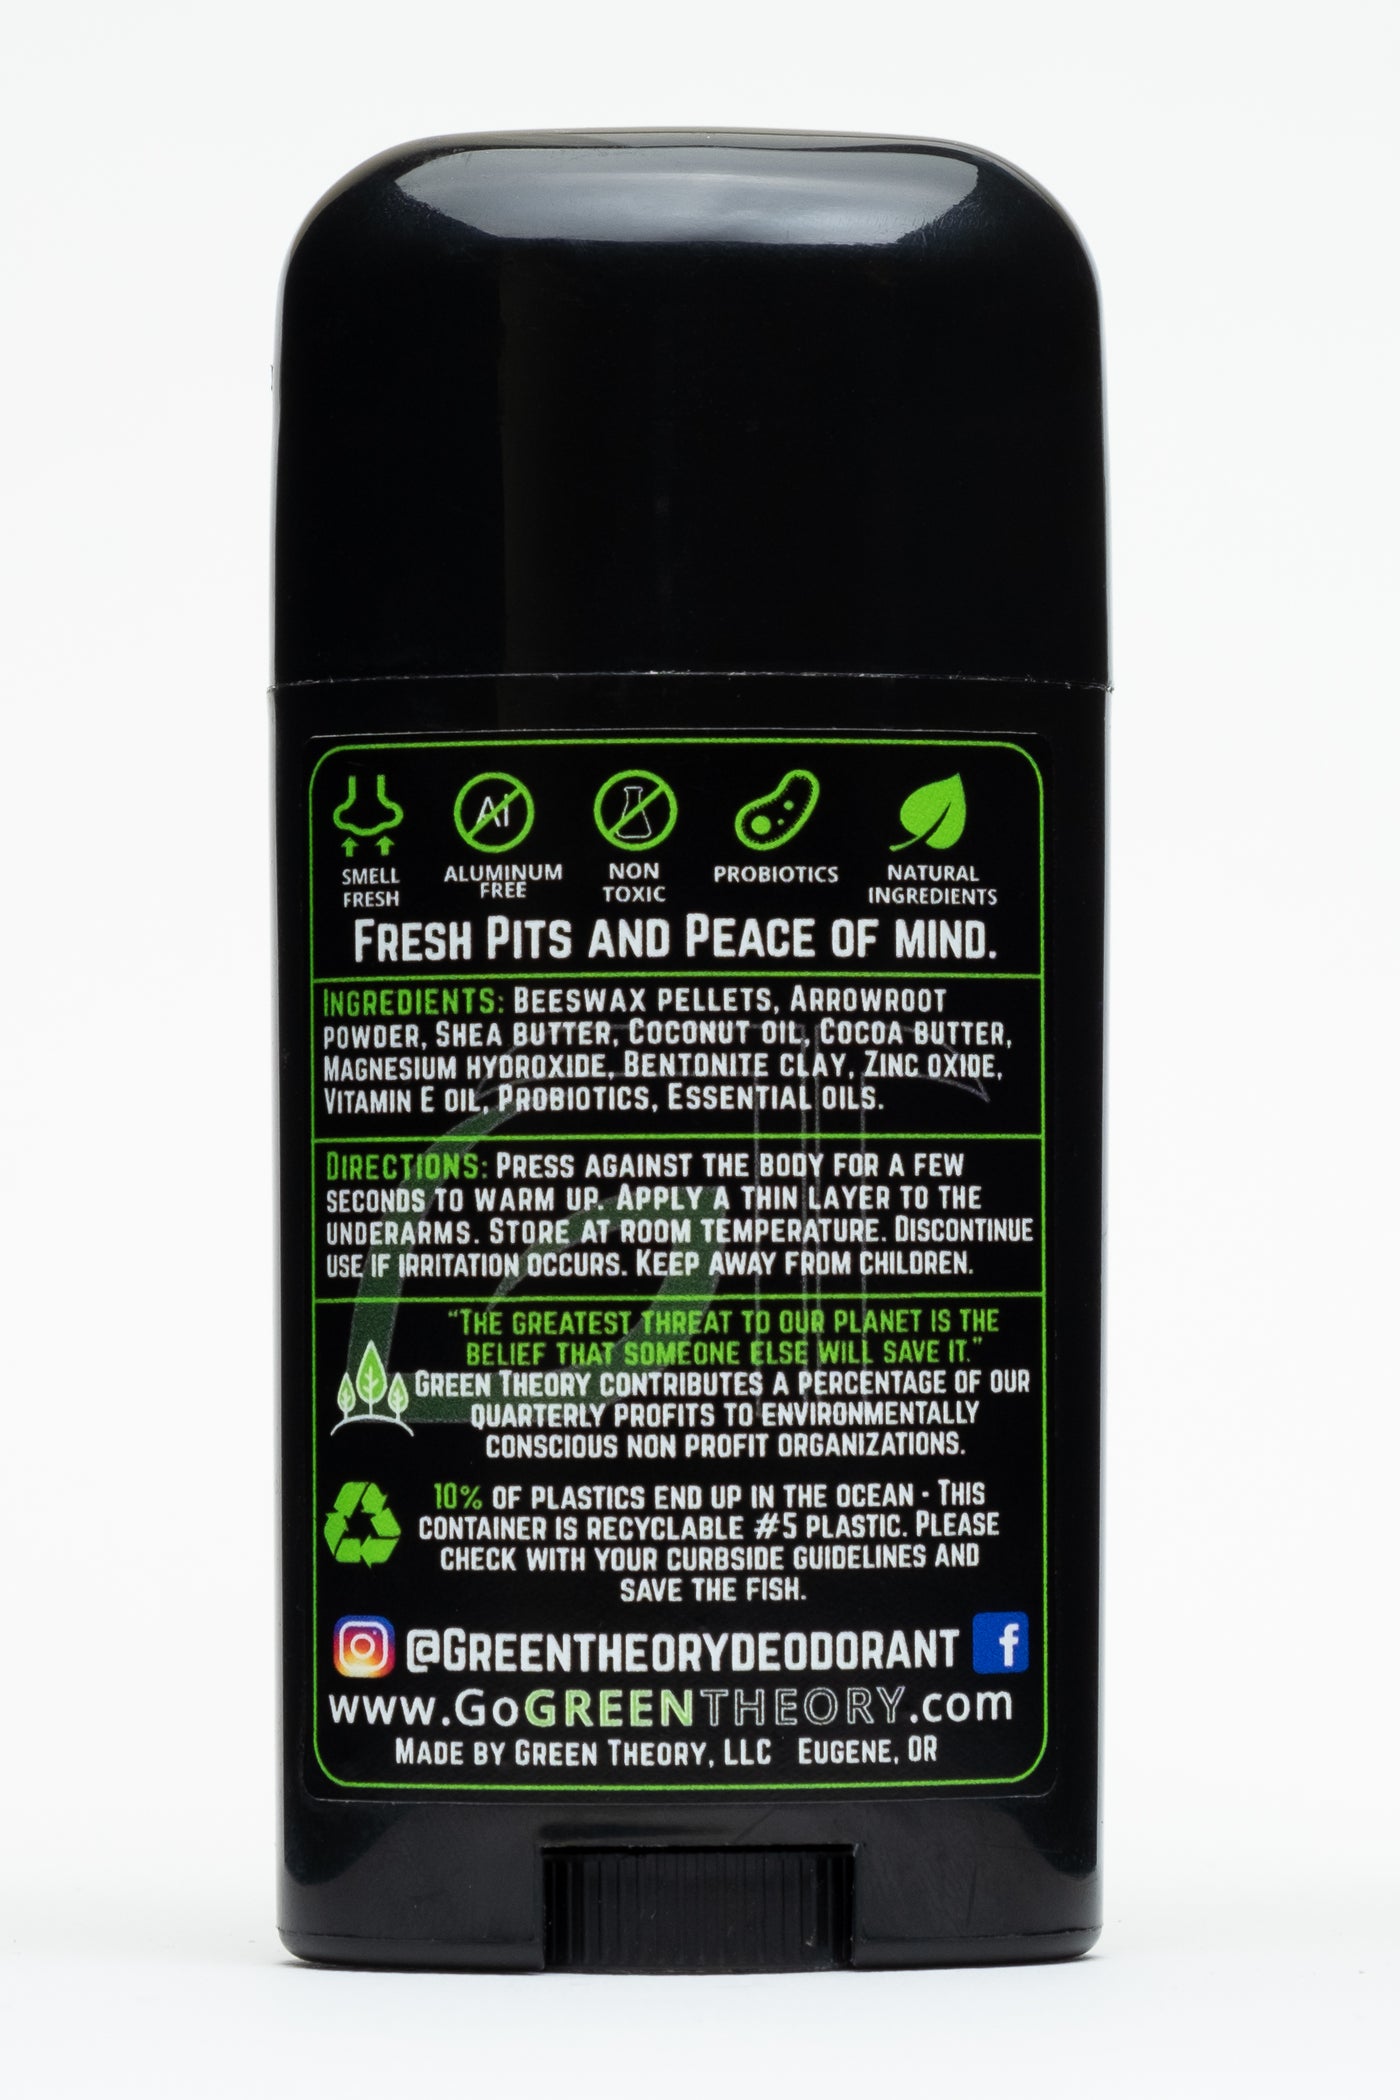 photo of the back of Green Theory Mojito baking soda free probiotic deodorant for men. From top to bottom, its divided into 4 sections. The top says fresh pits and peace of mind with five graphics of benefits. Under are the ingredients, directions for use, a reminder that the stick is recyclable and the green theory web page and social media pages